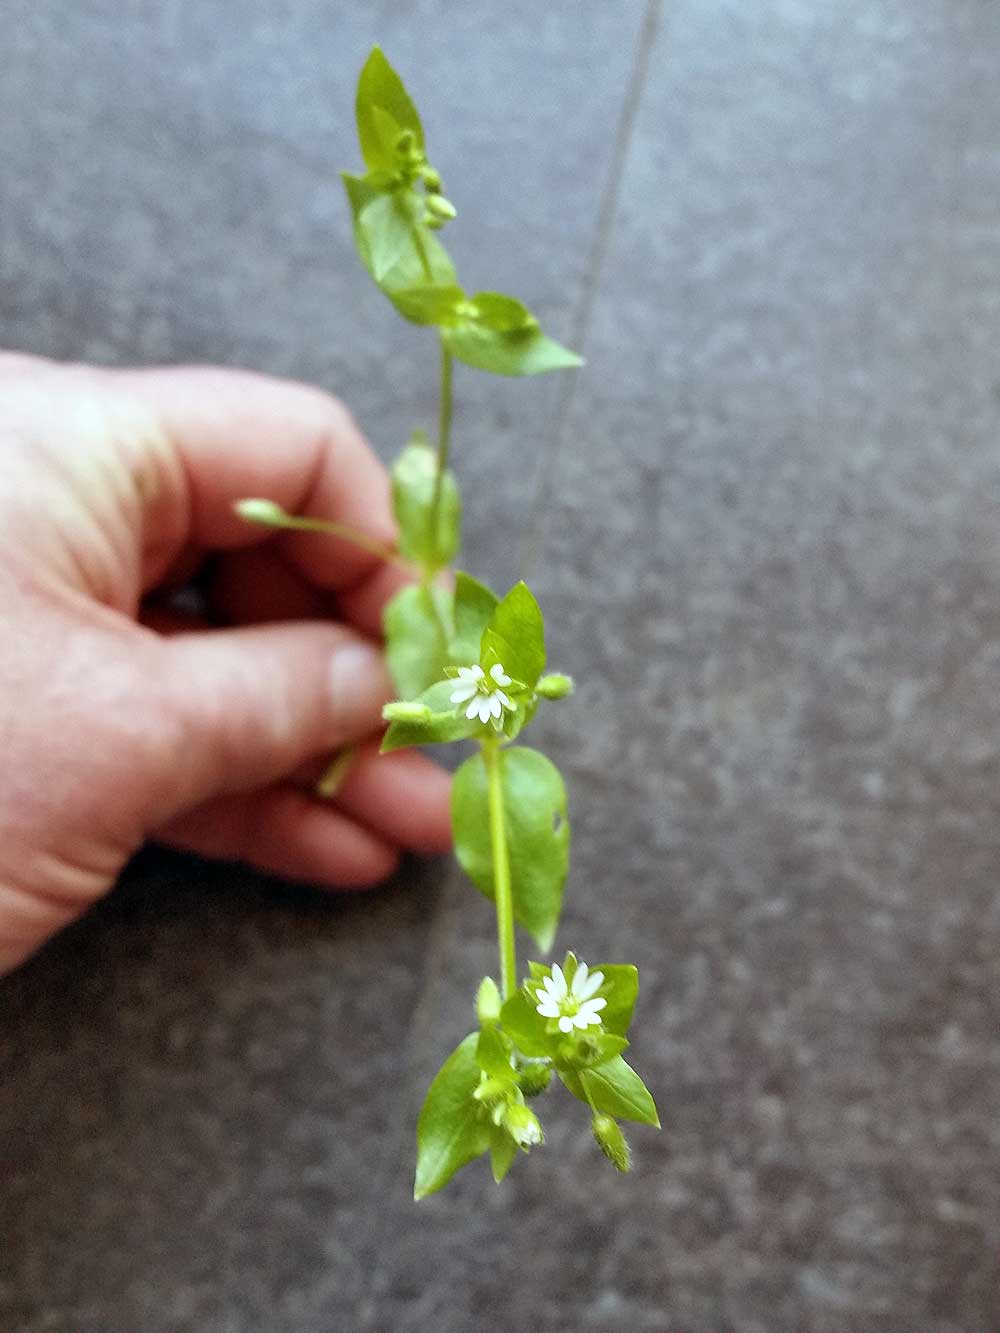 unknown weed